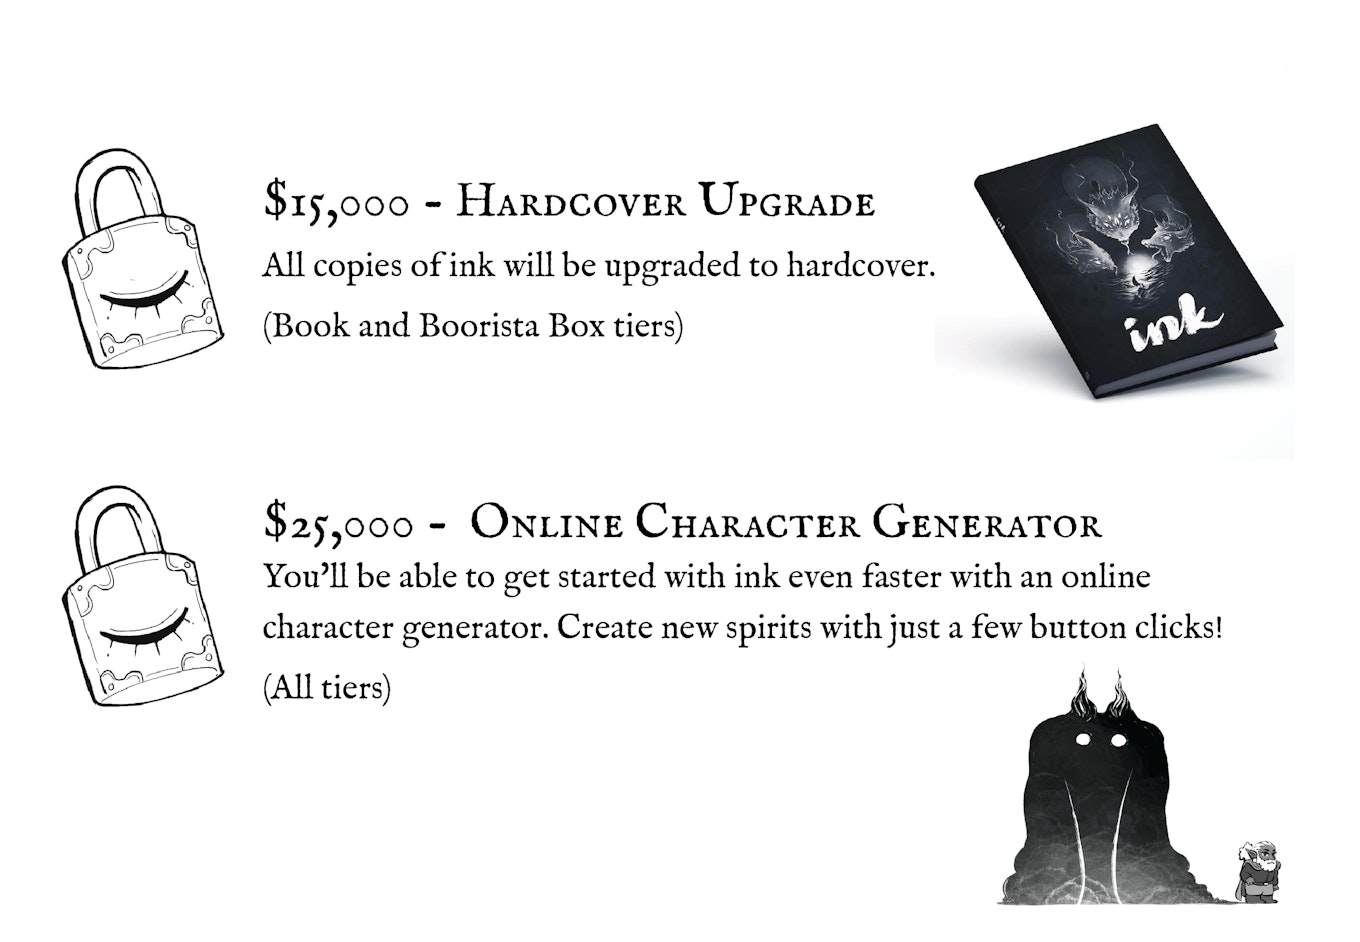 $15,000 Hardcover Upgrade All copies of ink will be upgraded to hardcover. (Book and Boorista Box tiers) $25,000 Online Character Generator You'll be able to get started with ink even faster with on online character generator. Create new spirits with just a few button clicks! (all tiers)